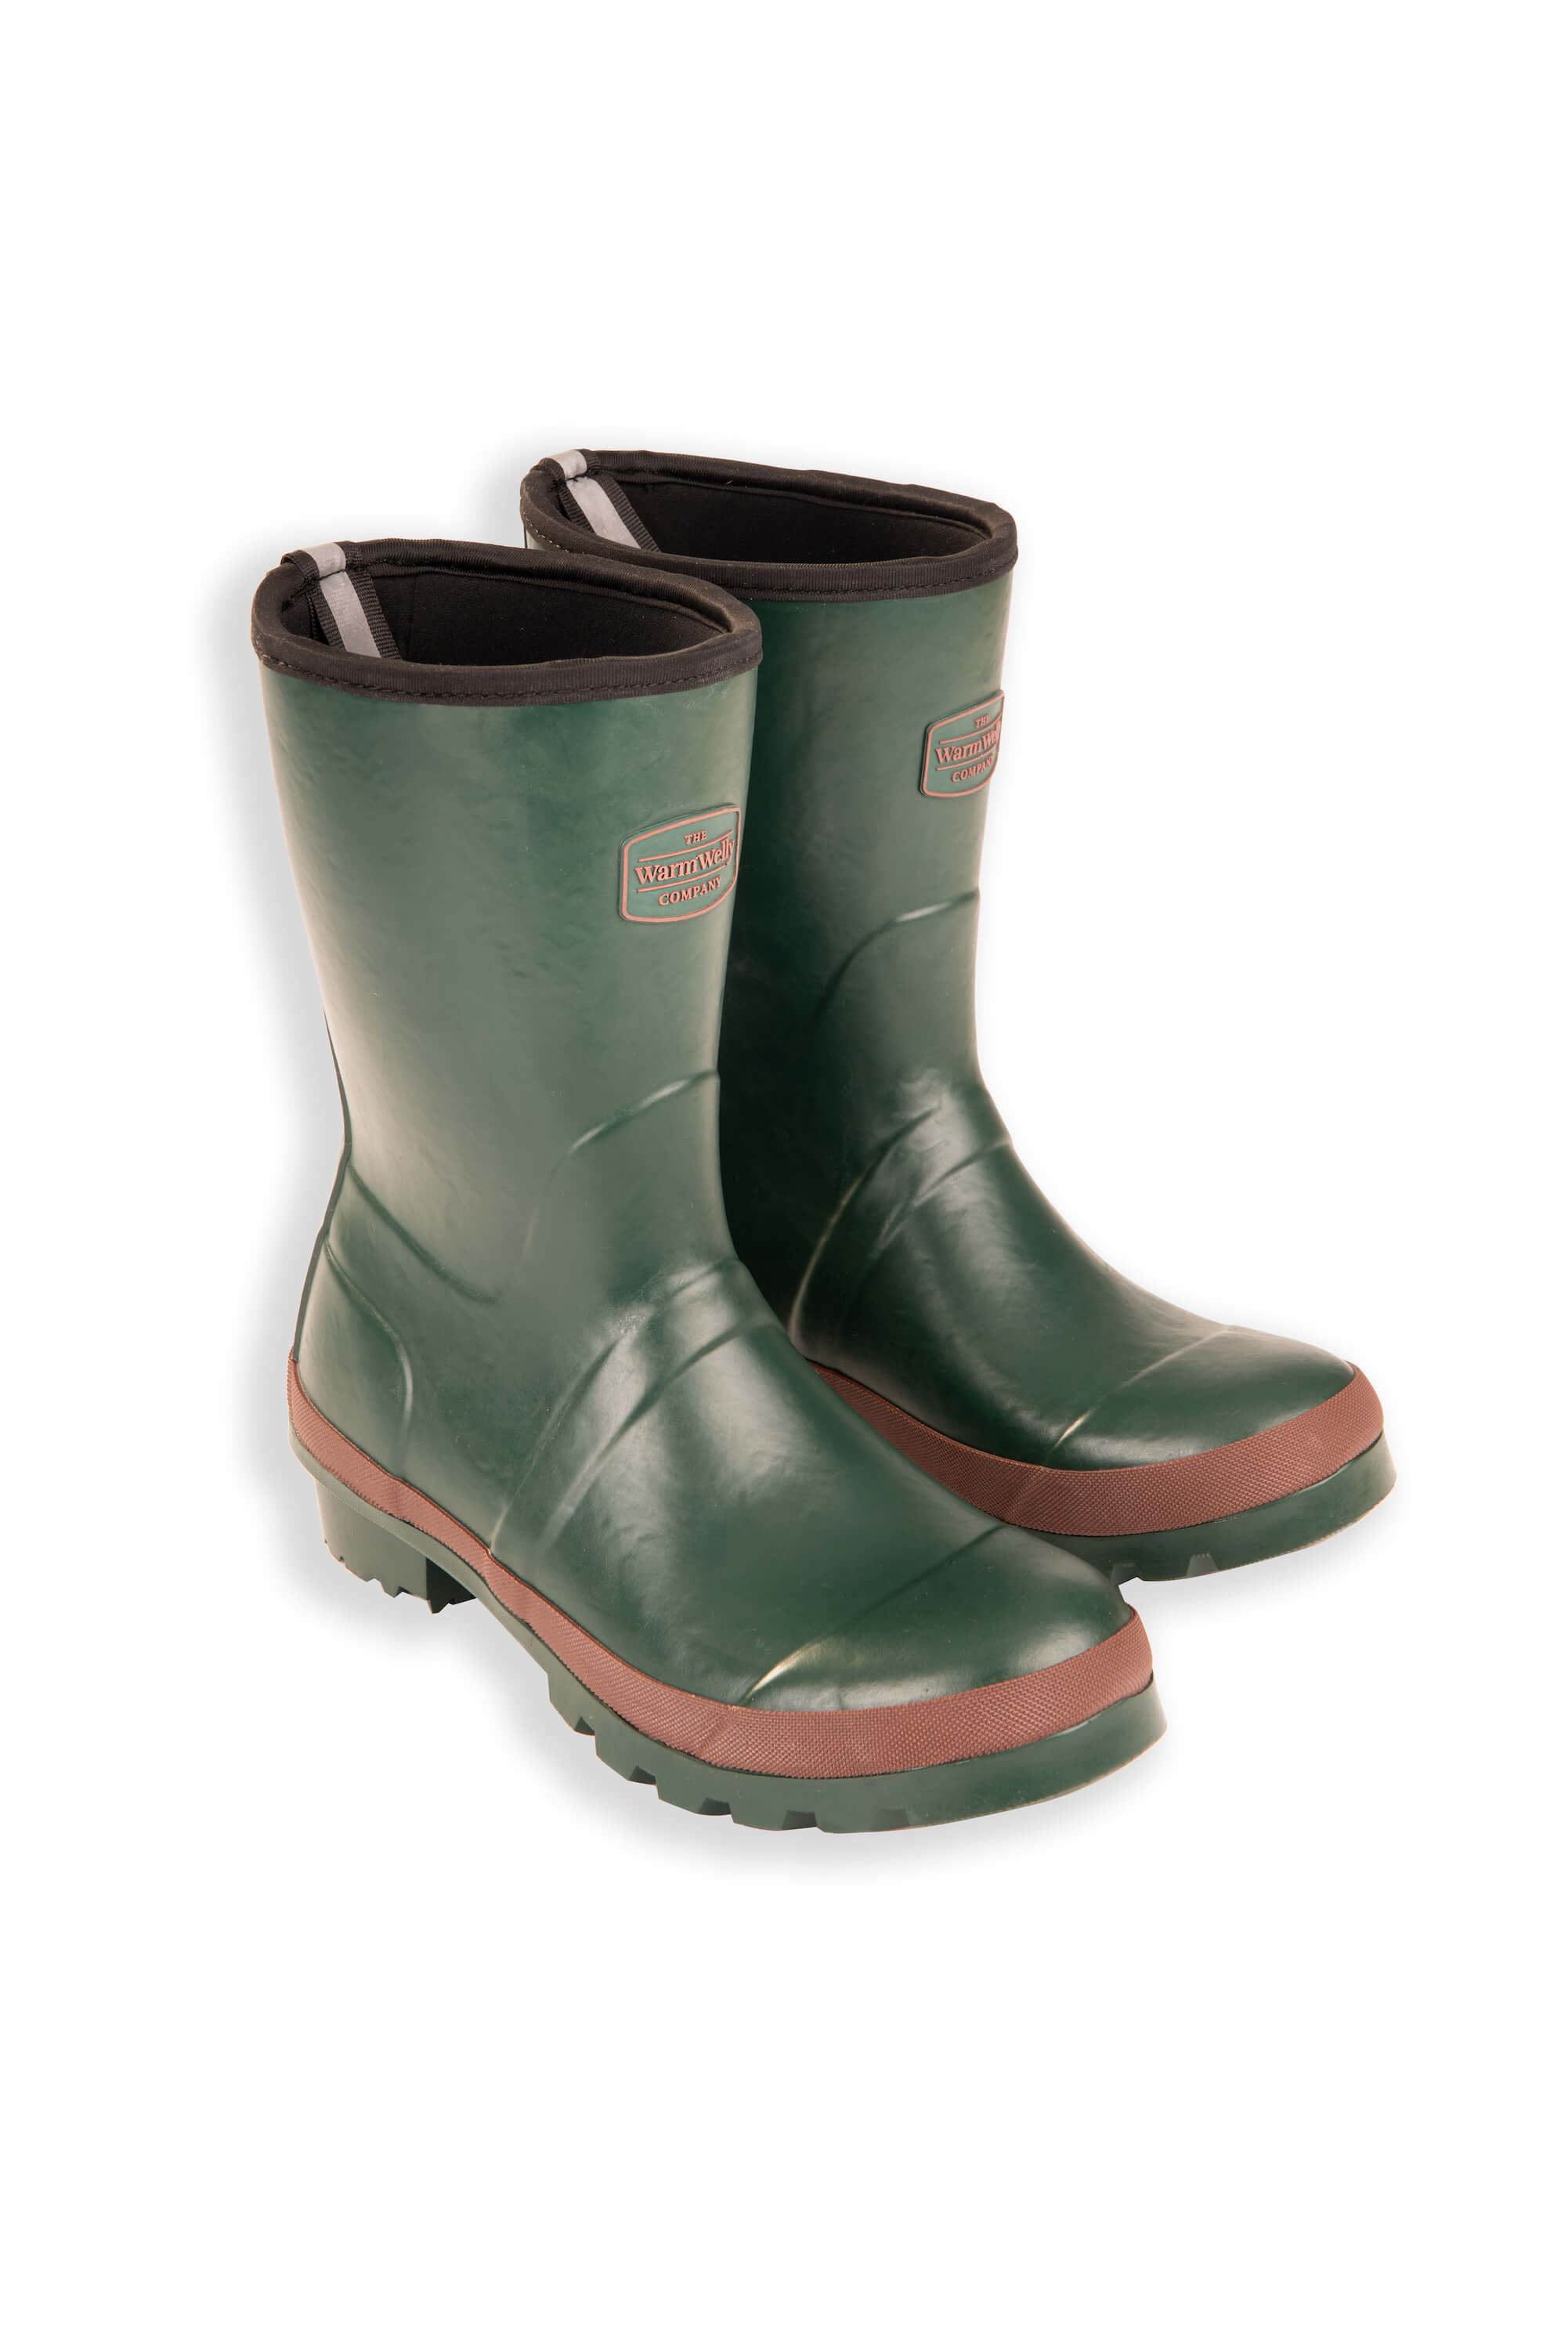 Seconds Green Adult Short Warm Wellies | The Warm Welly Company